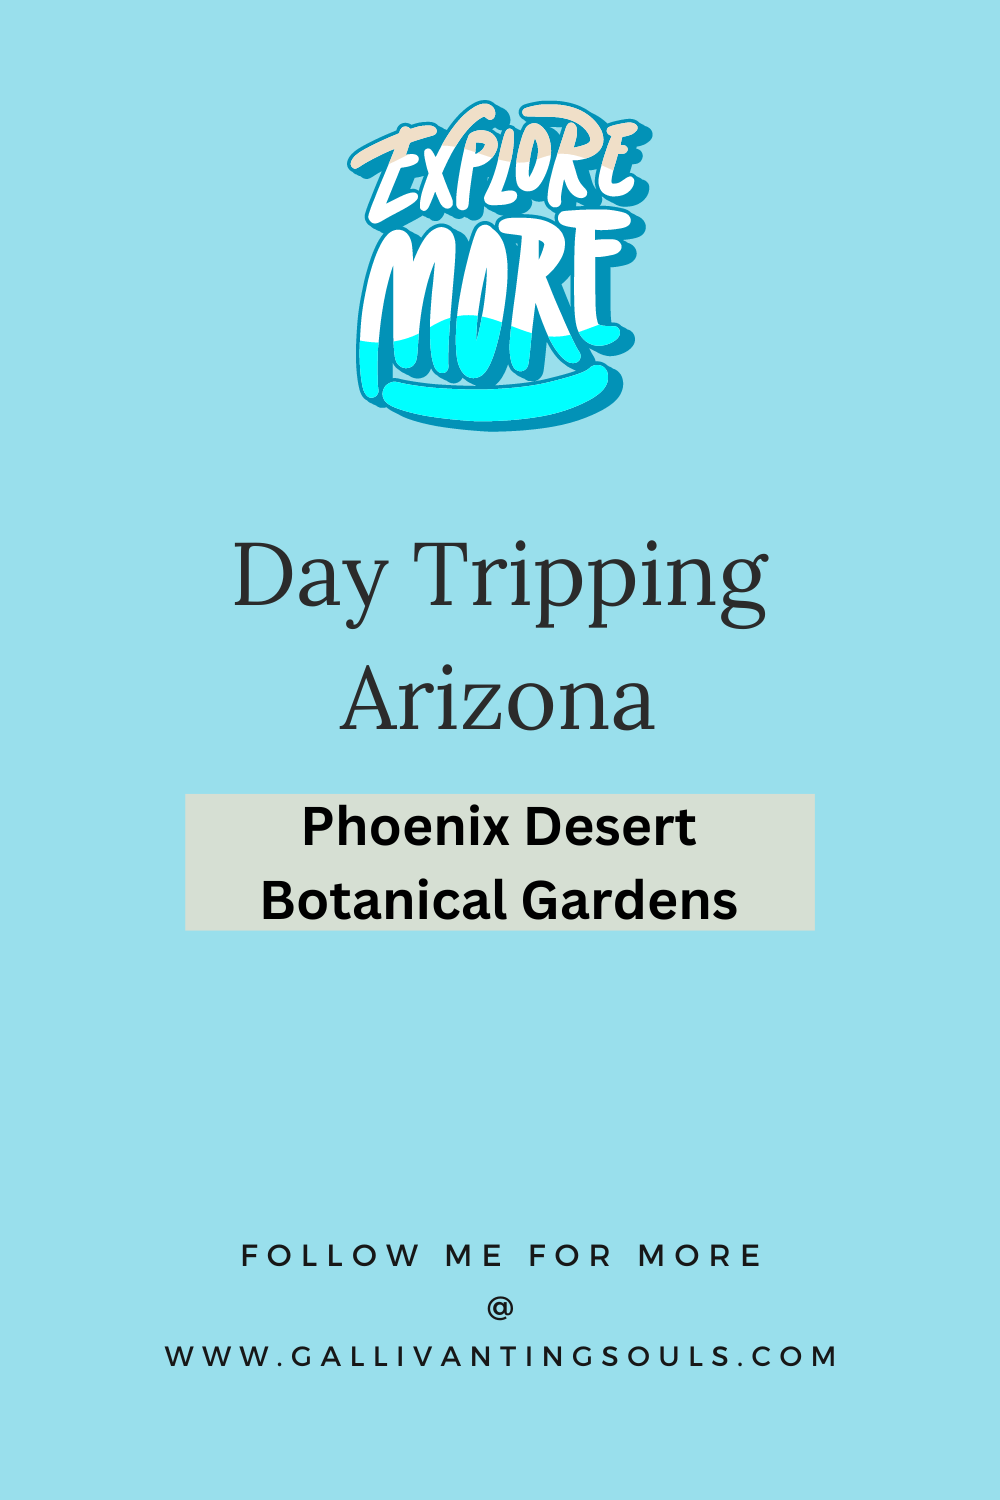 Planning a trip to Phoenix to see the Desert Botanical Gardens? Grab this guide.